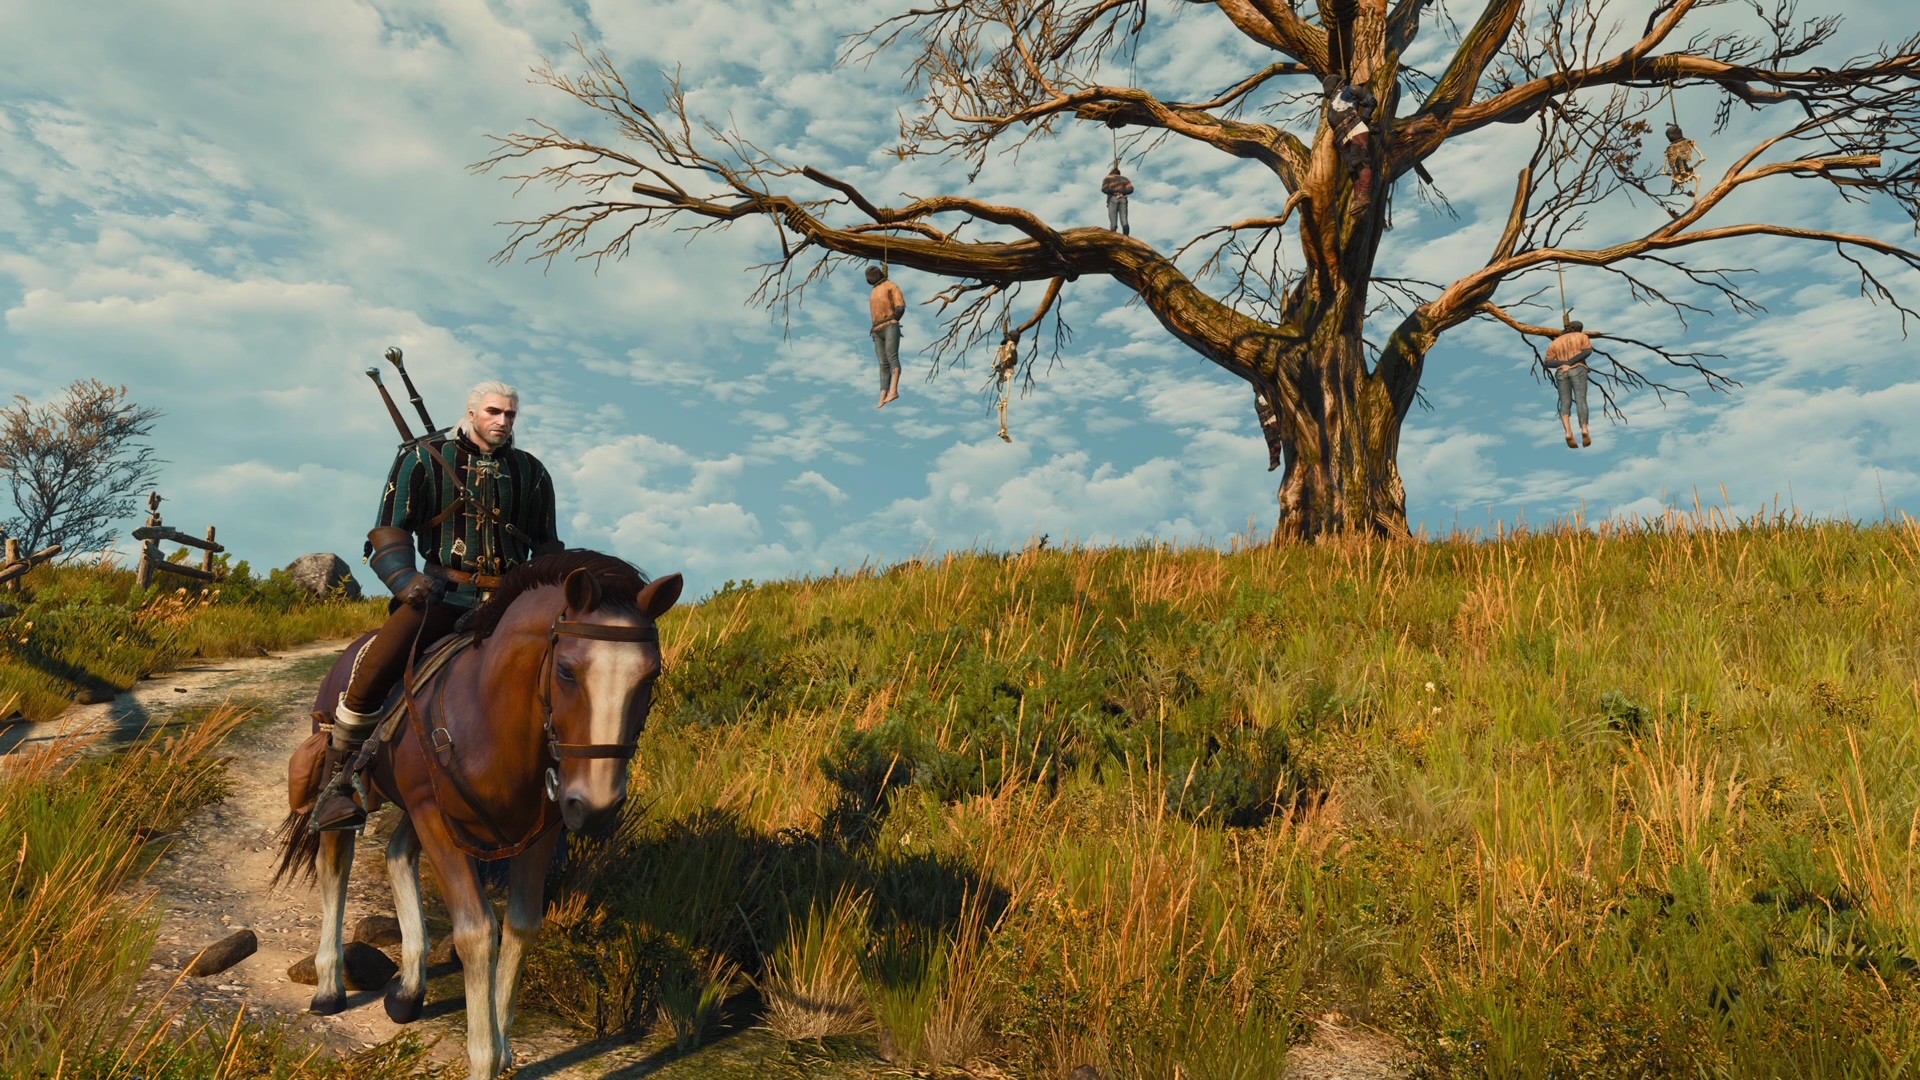 The Witcher 3's latest patch delivers the best console performance